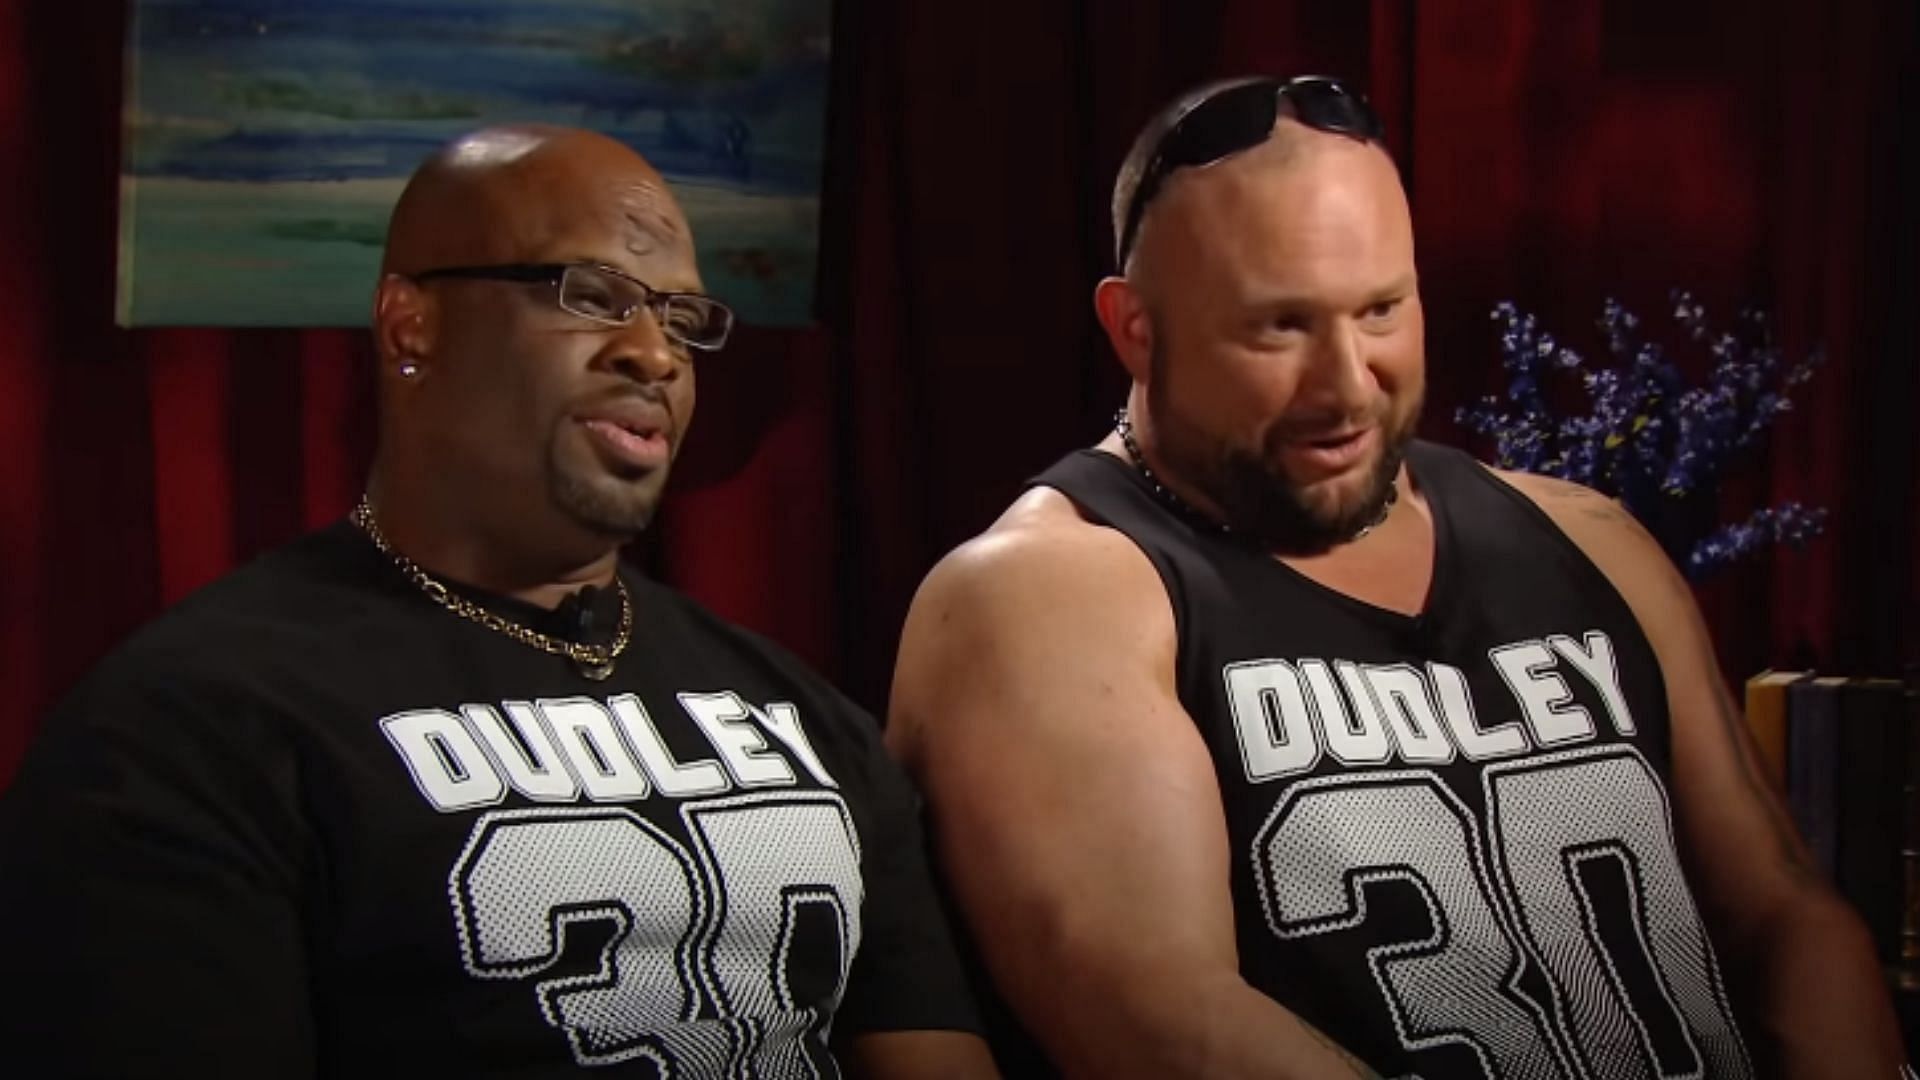 D-Von Dudley (left); Bubba Ray Dudley/Bully Ray (right)